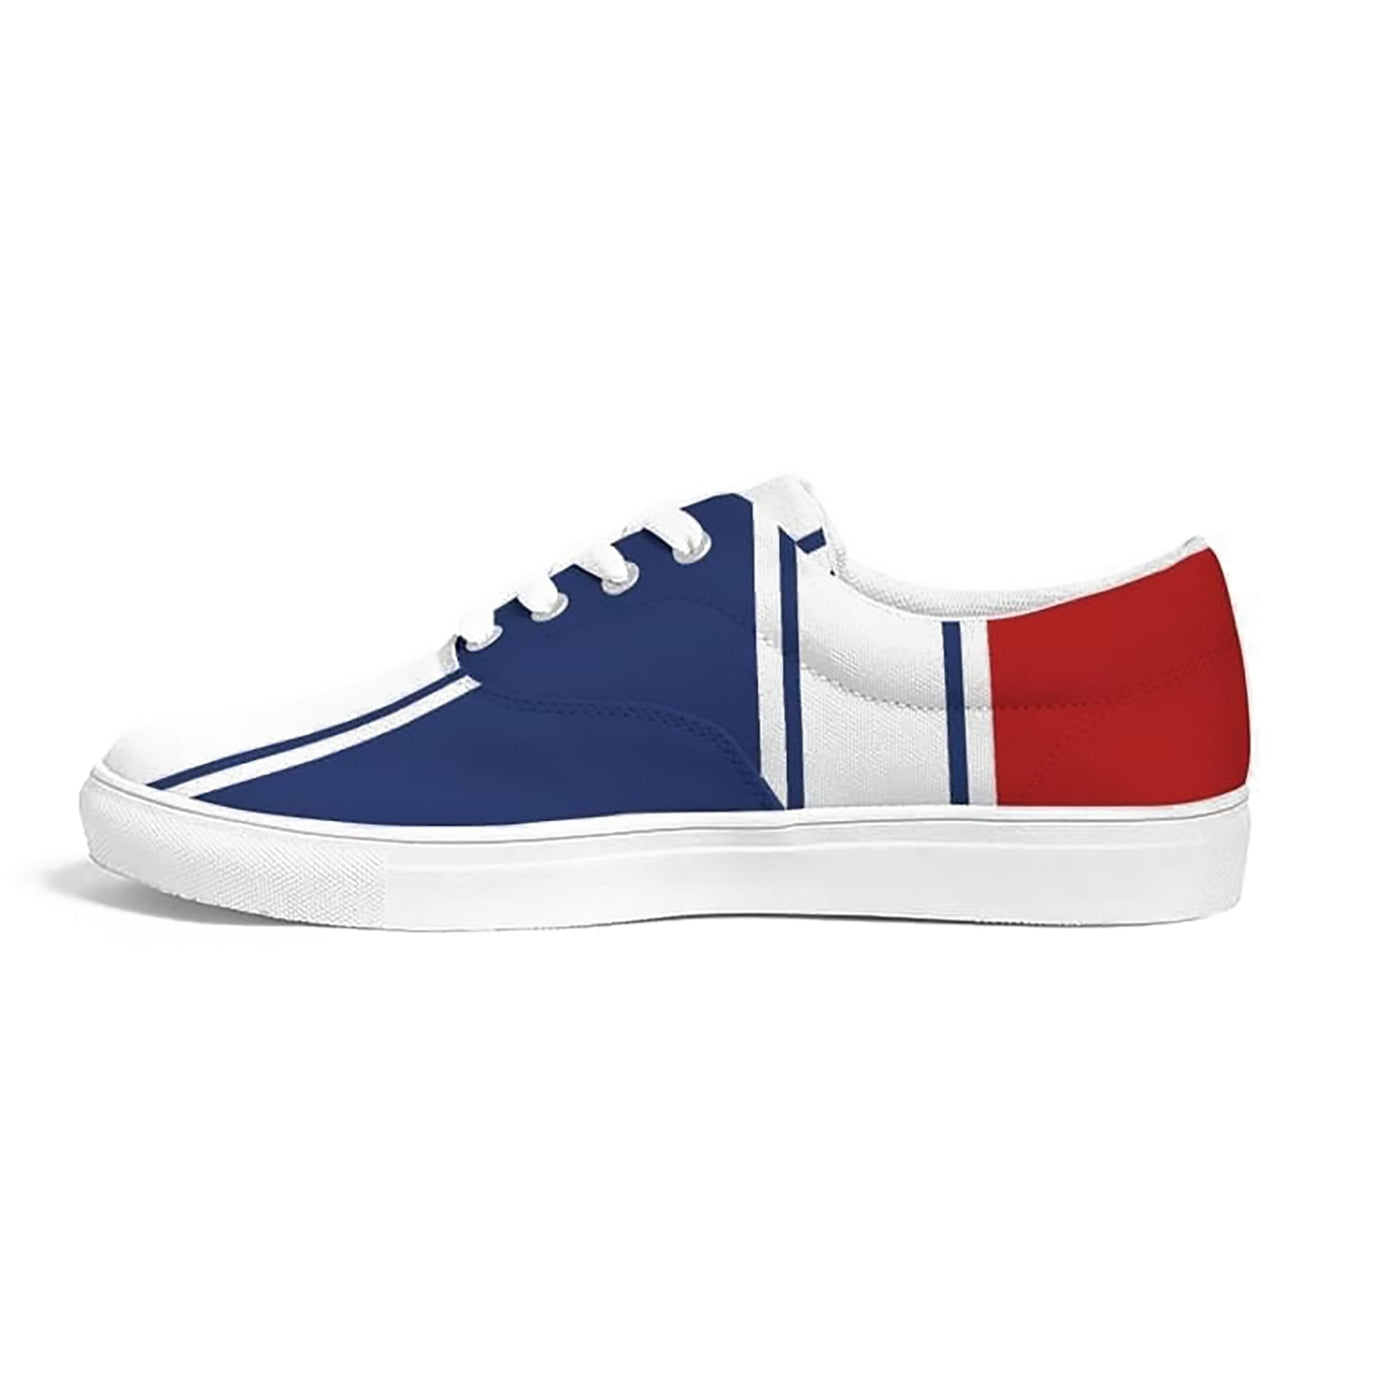 Sneakers For Men Blue Red White Striped Print - Sports Shoes - Mens | Sneakers